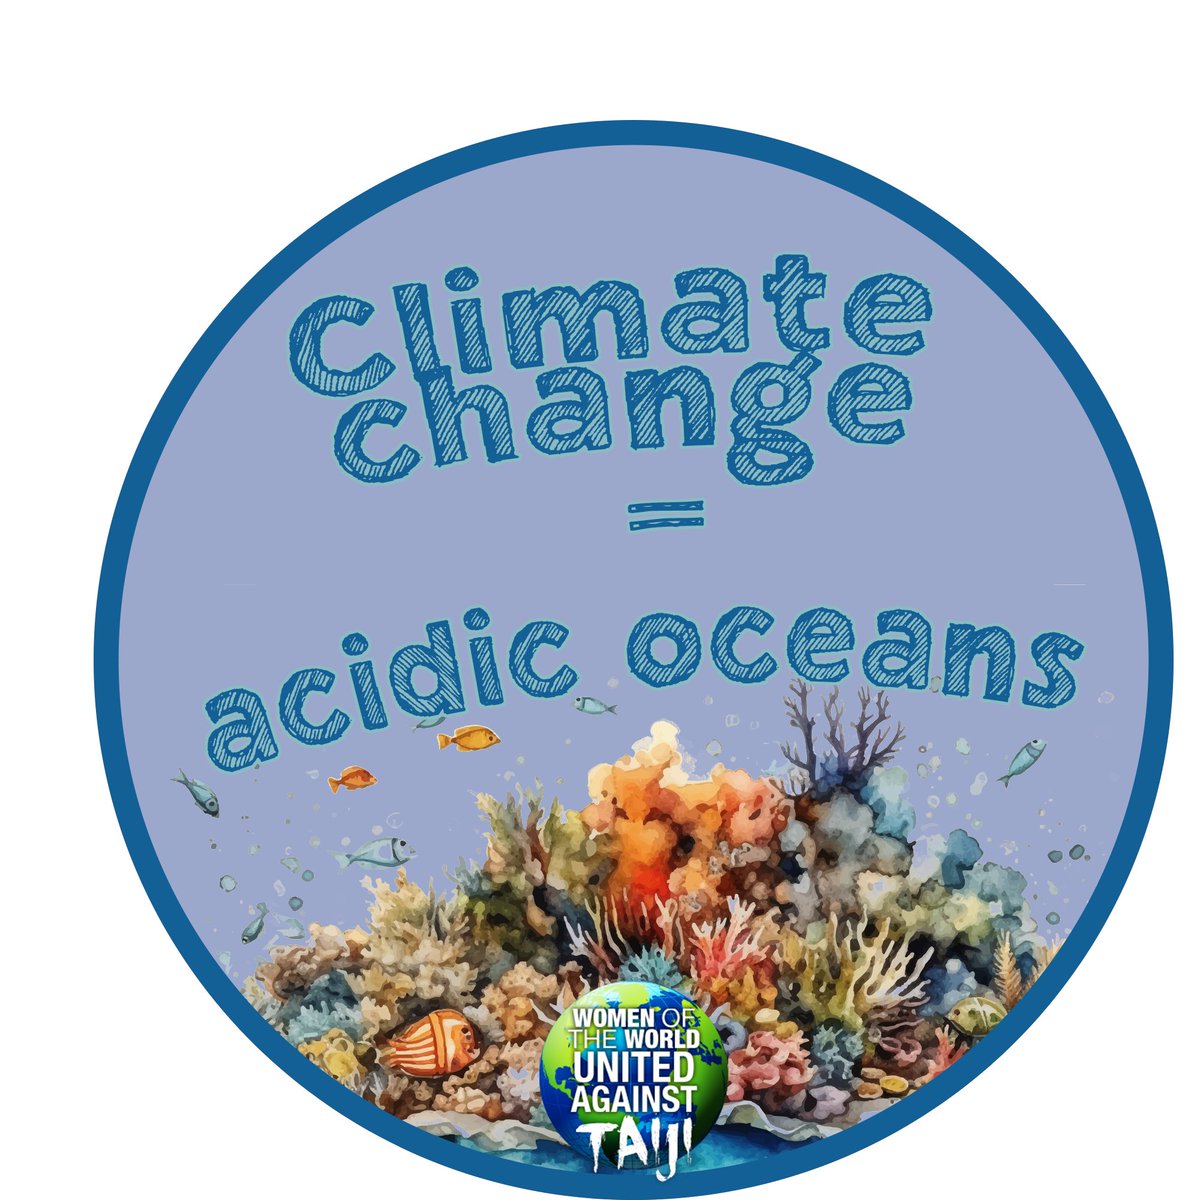 Climate change has a huge impact on the oceans. Particularly evident in tropical regions where marine ecosystems are fragile and rich in biodiversity and habitats are undergoing irreversible changes. #WOWvTaiji #Ocean website: wowvstaiji.com